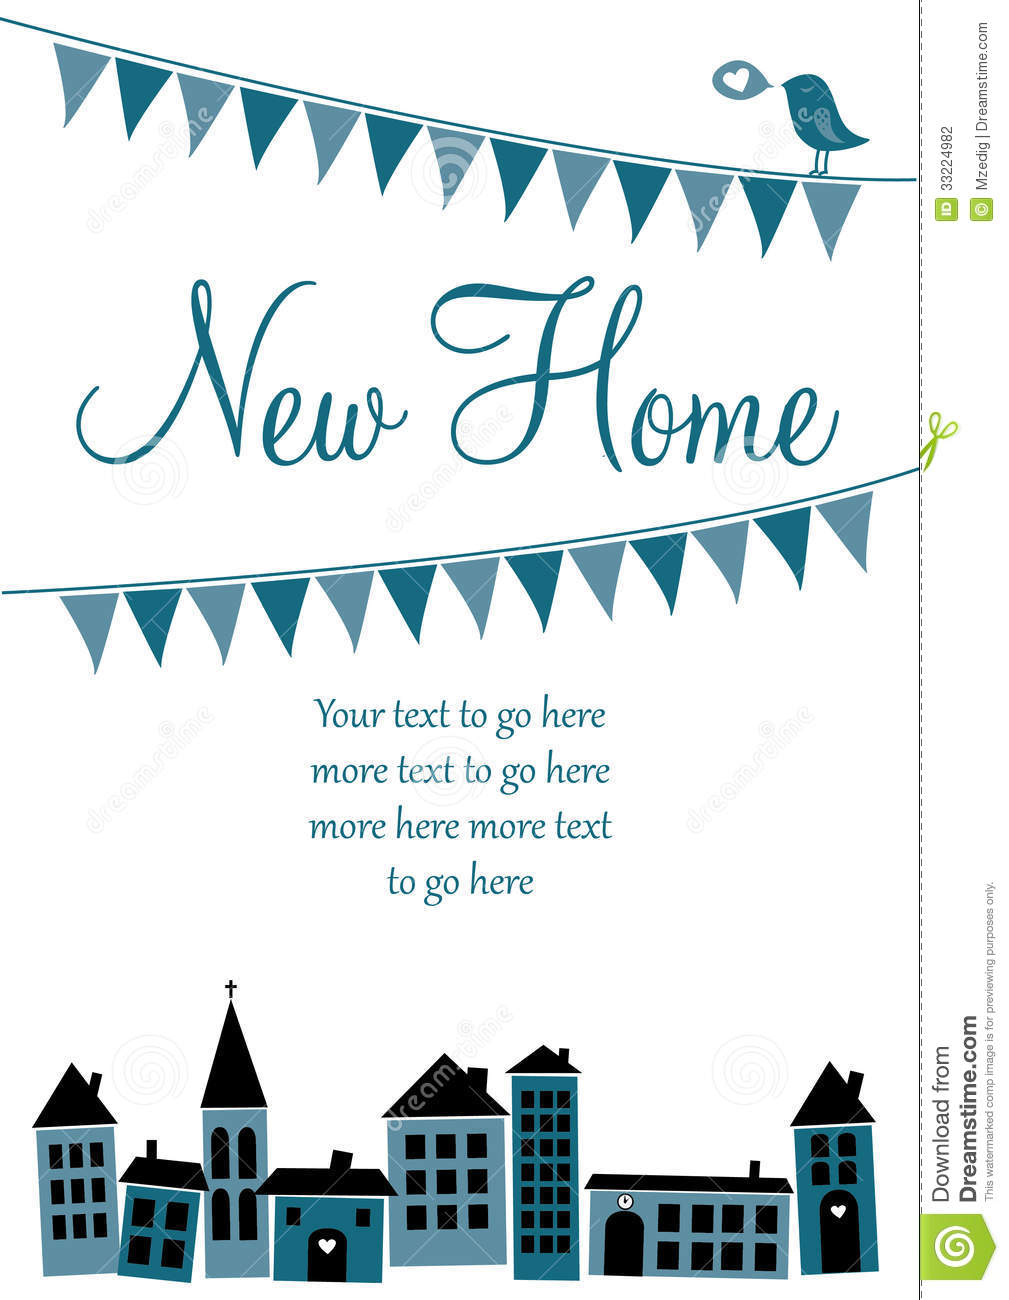 New Home Card Stock Vector. Illustration Of Home, Sale For Moving Home Cards Template